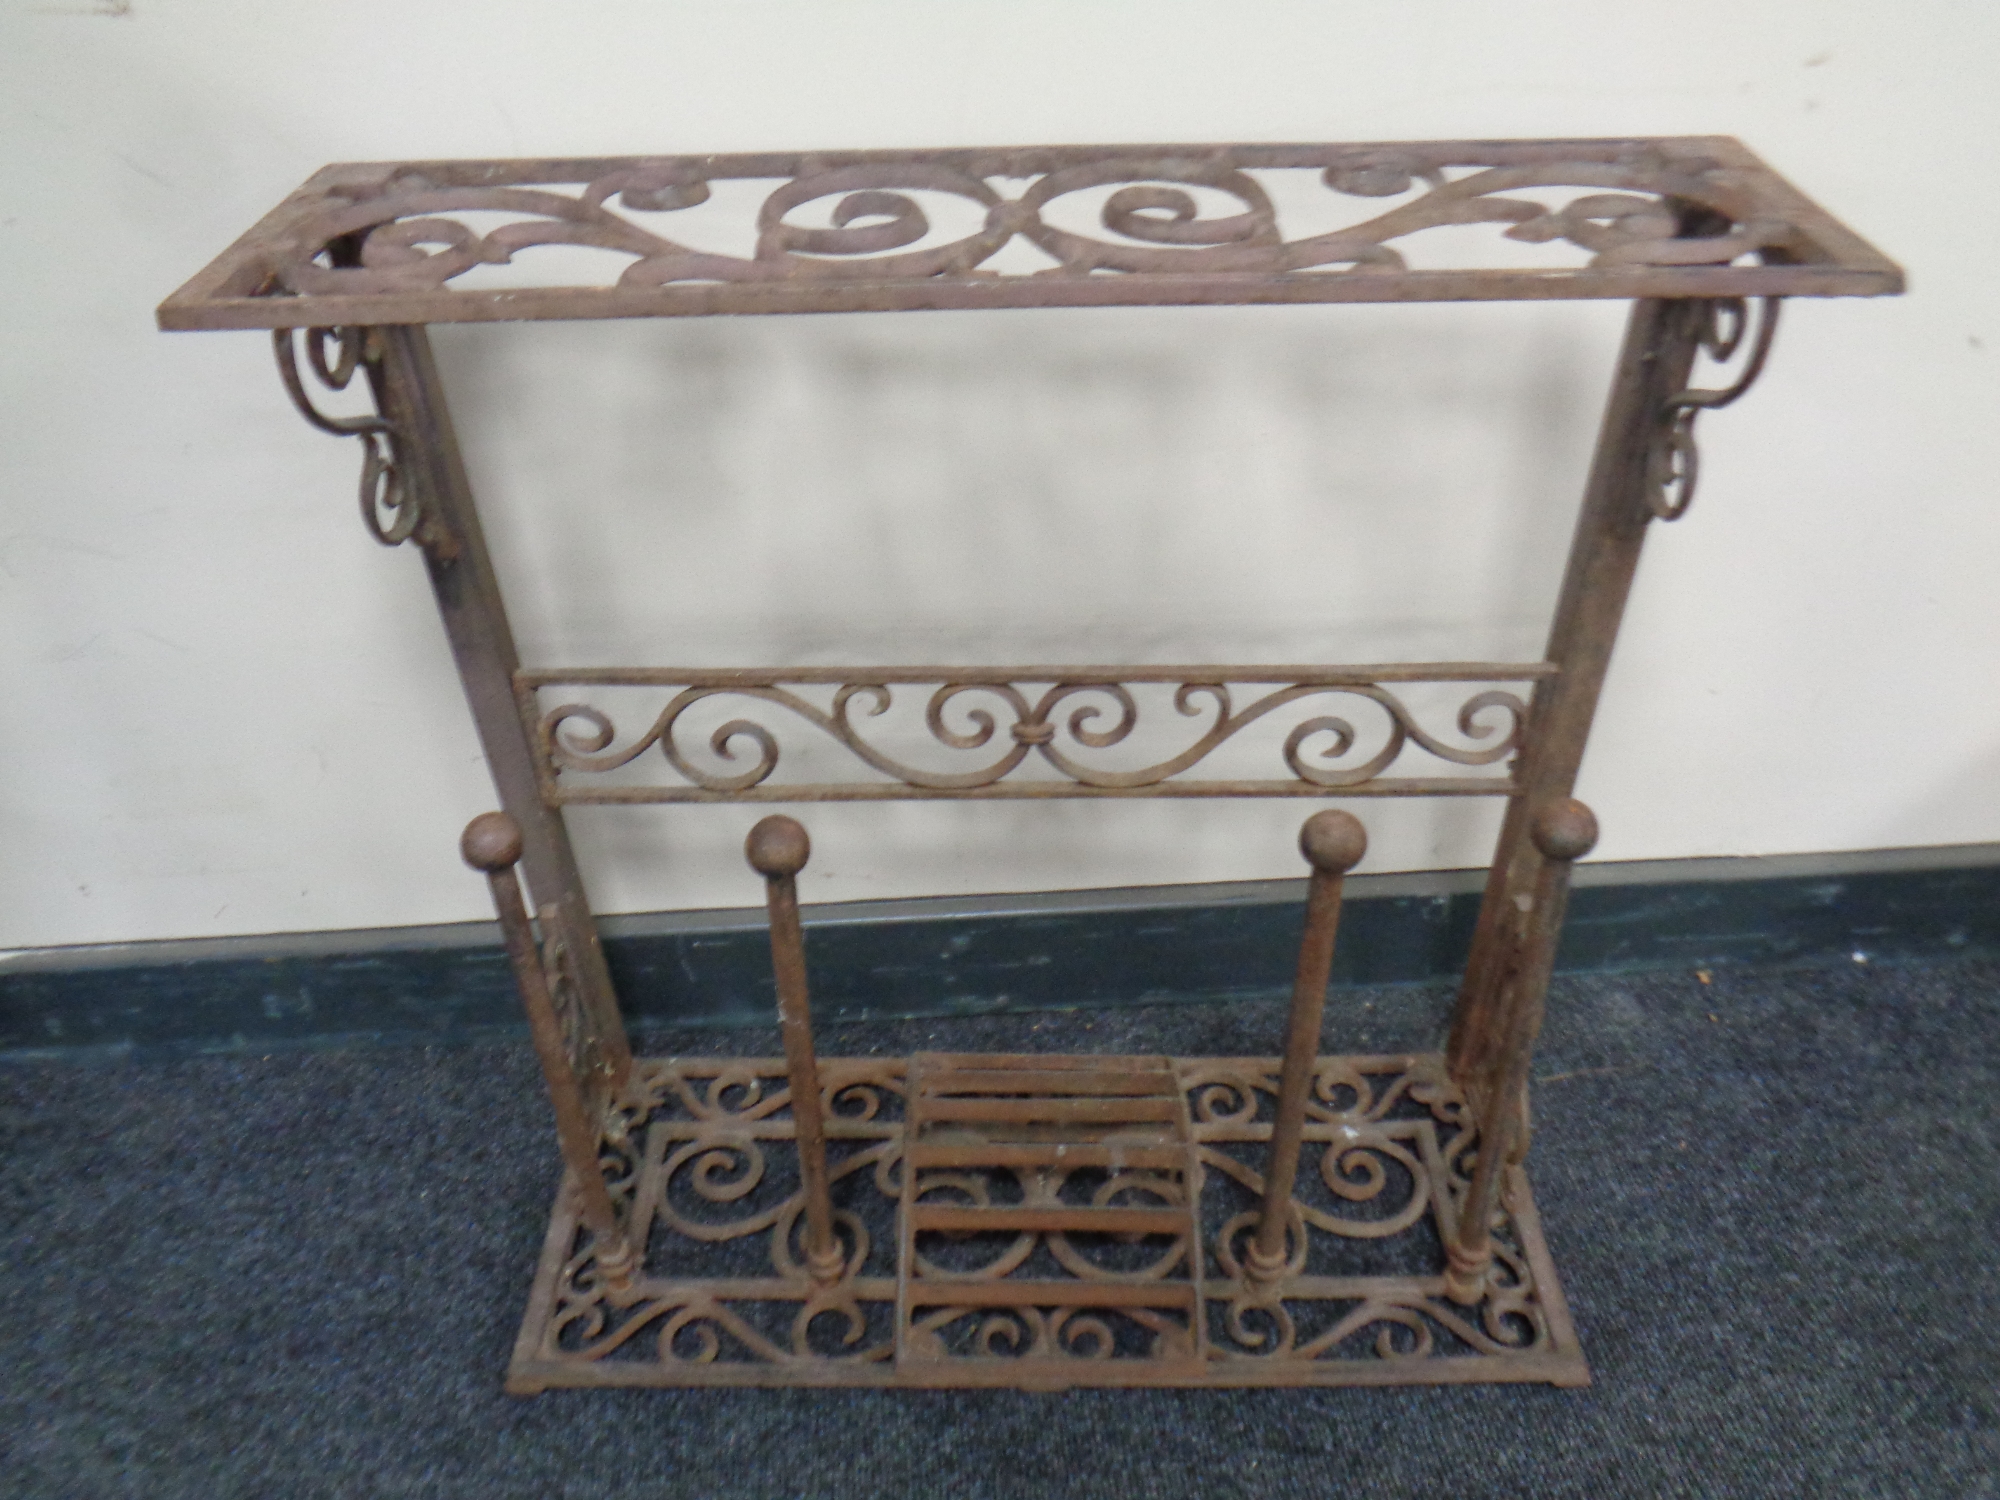 A wrought iron boot stand